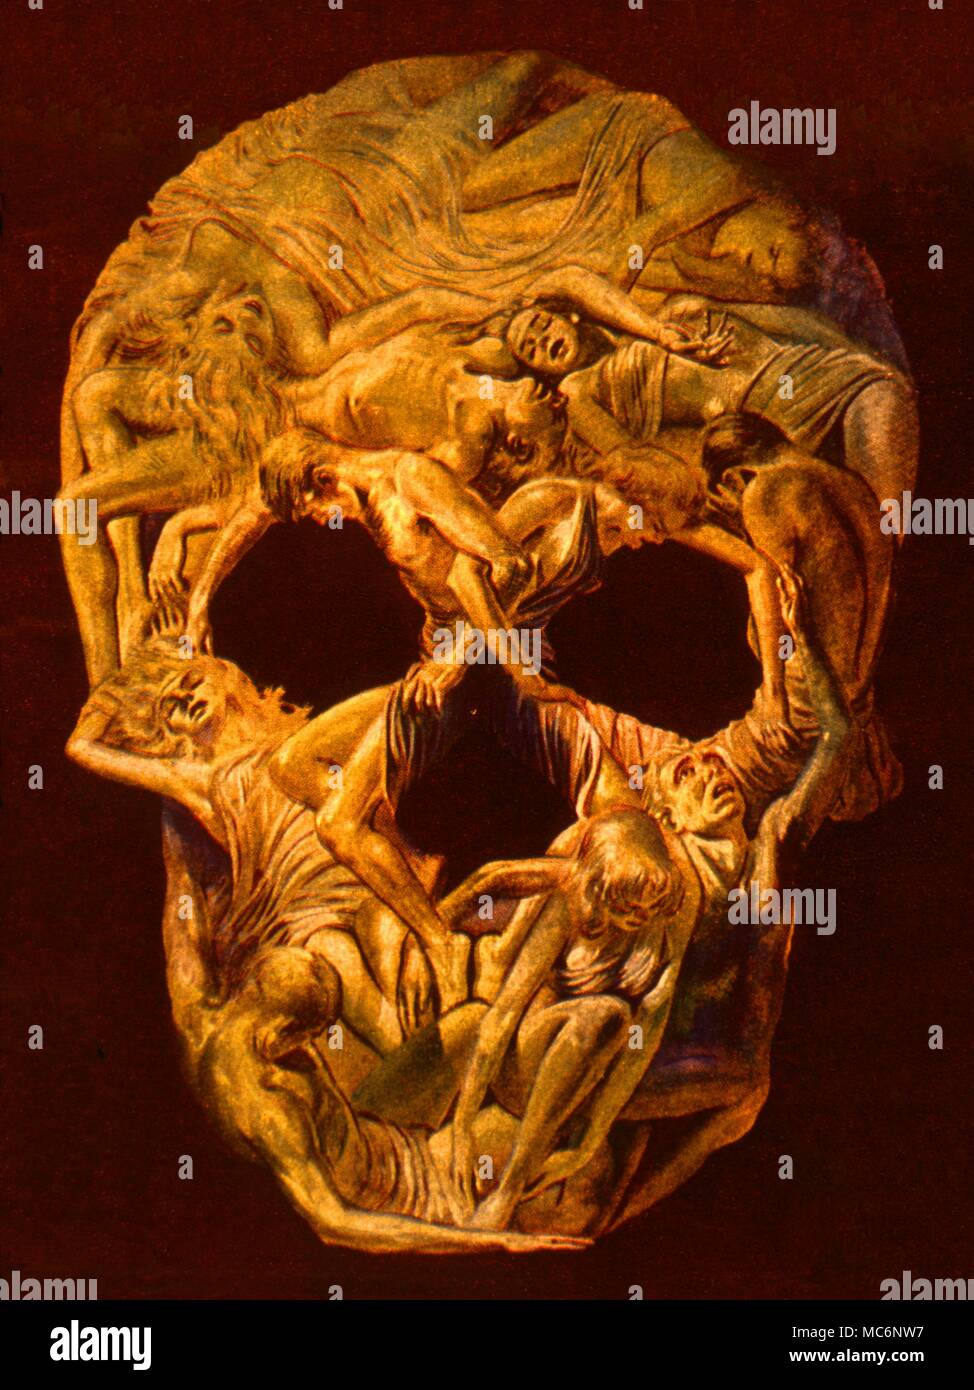 Skull of human forms, derived from the artwork of Virgil Finlay for the cover of 'Famous Fantastic Stories' August 1946. Stock Photo